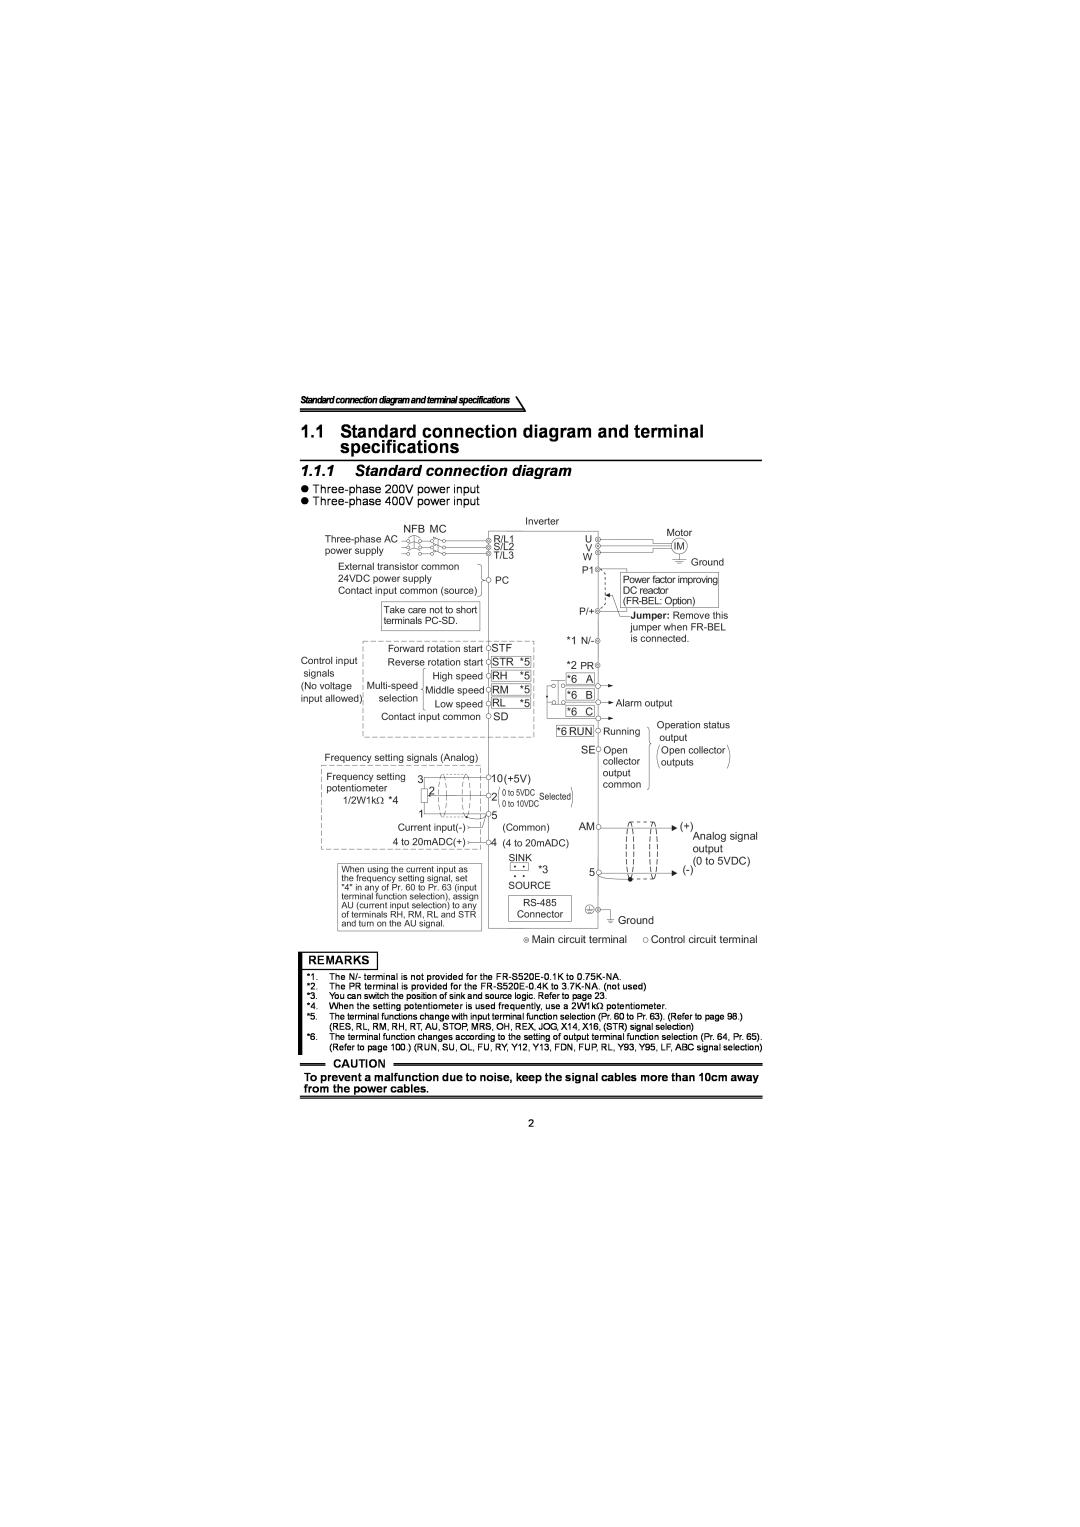 Mitsubishi Electronics FR-S500 instruction manual Standard connection diagram and terminal specifications 